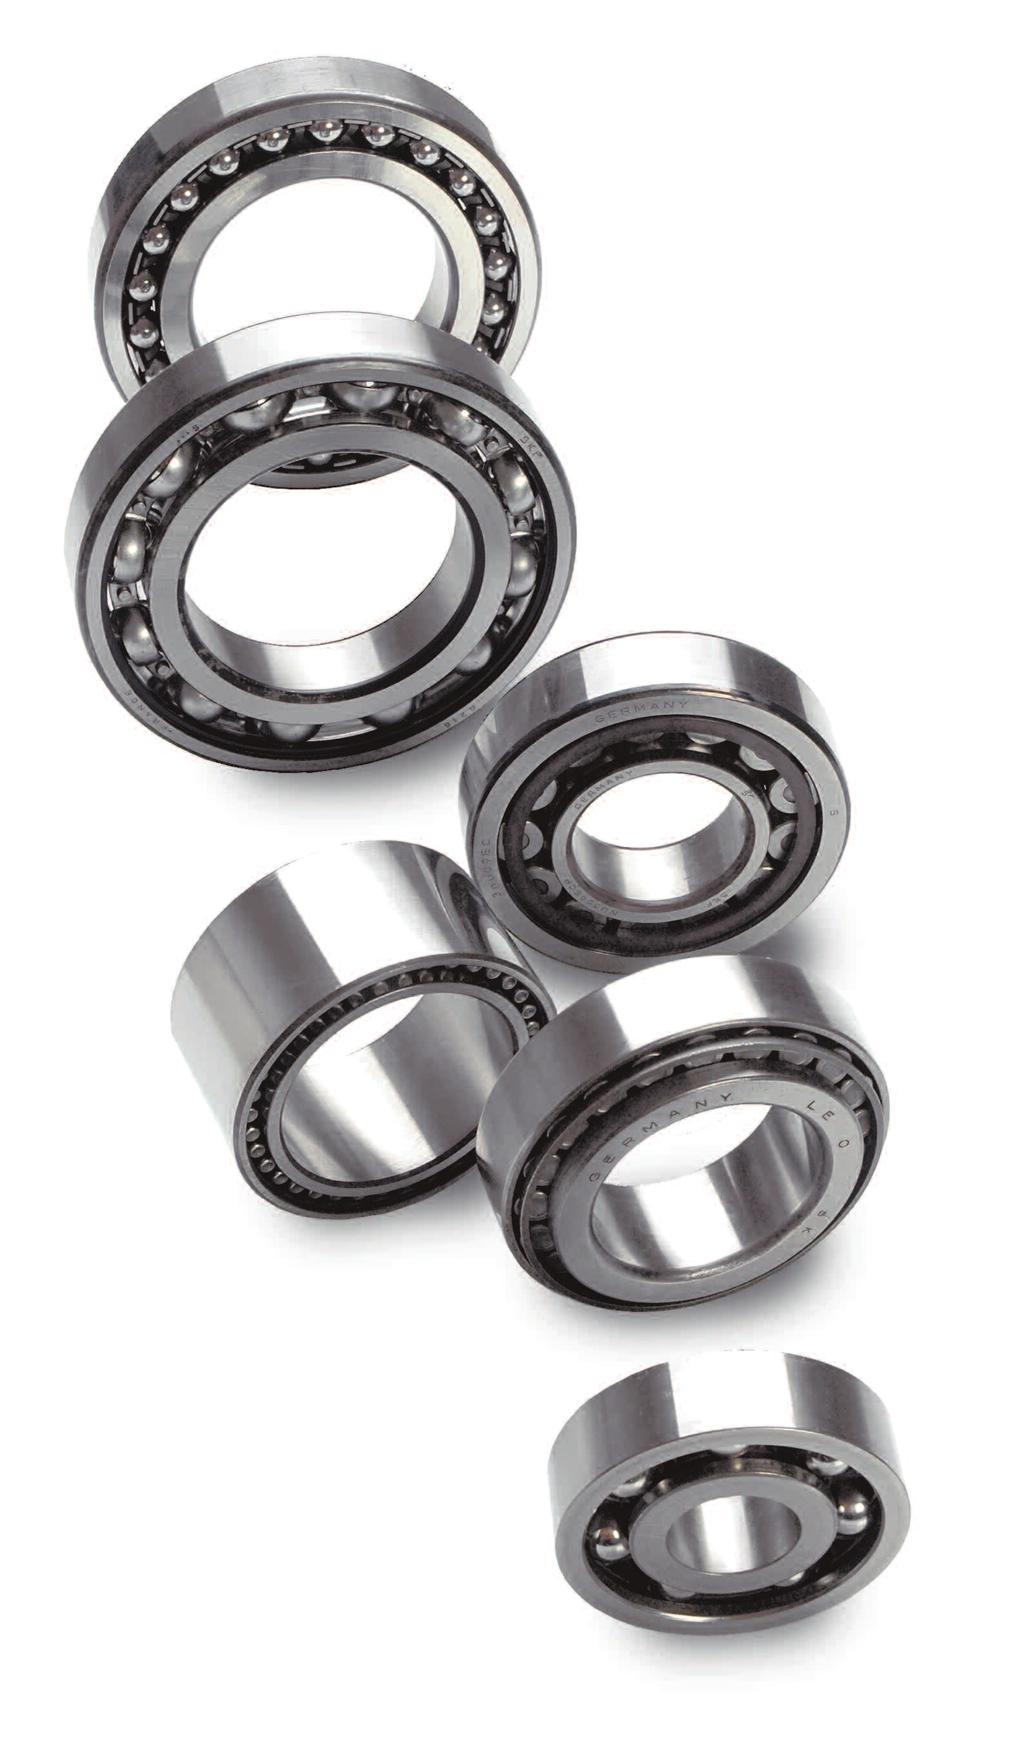 Through-hardening bearing steels for bainitic hardening These grades are used for bainitic hardened medium and large-sized bearing components.